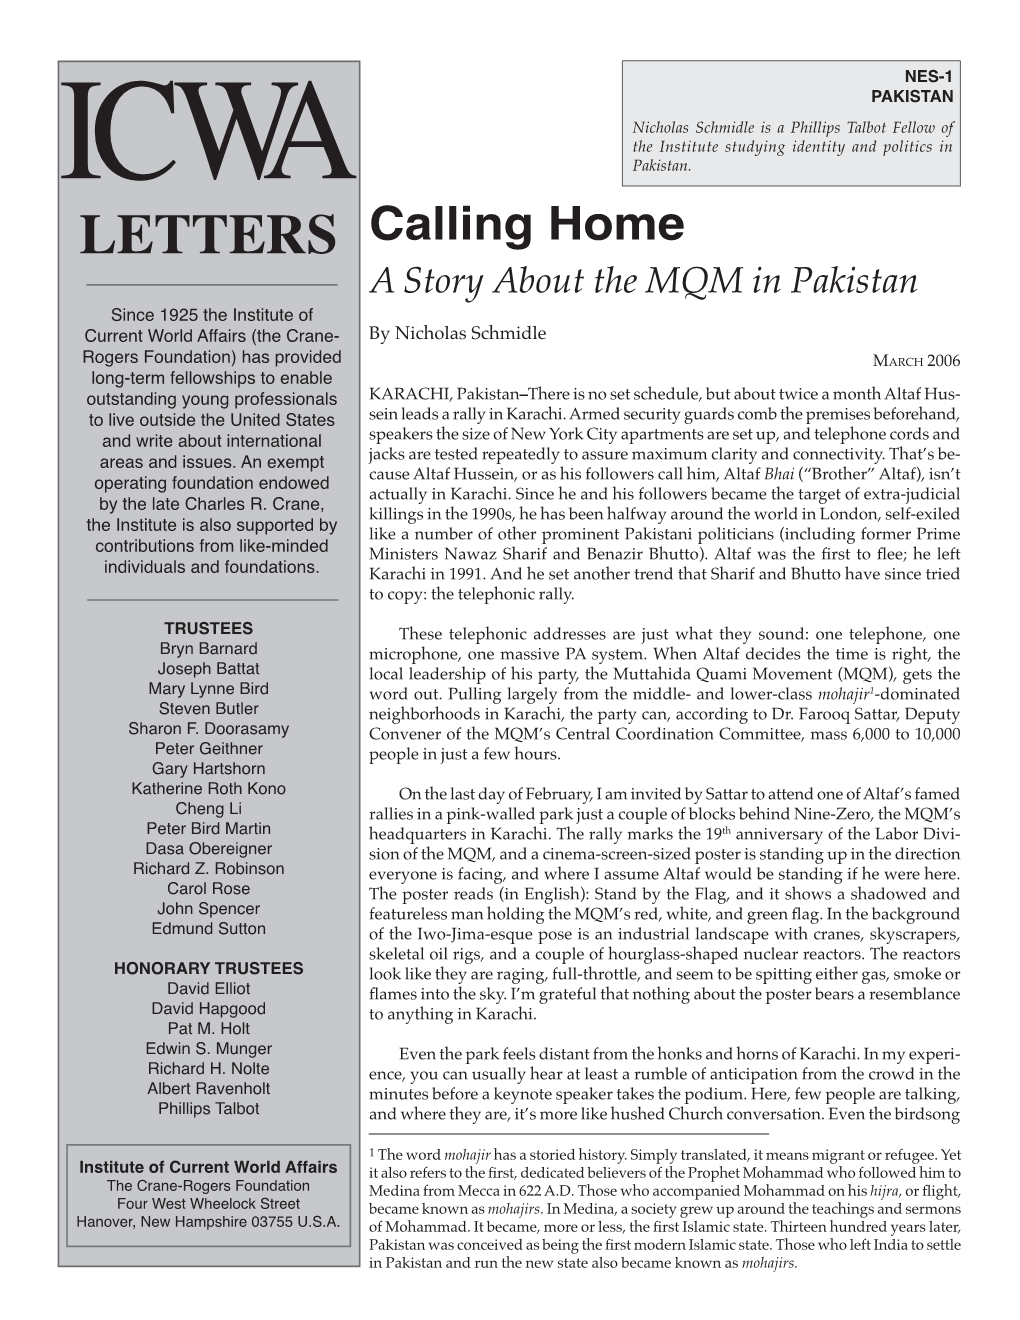 Calling Home: a Story About the MQM in Pakistan